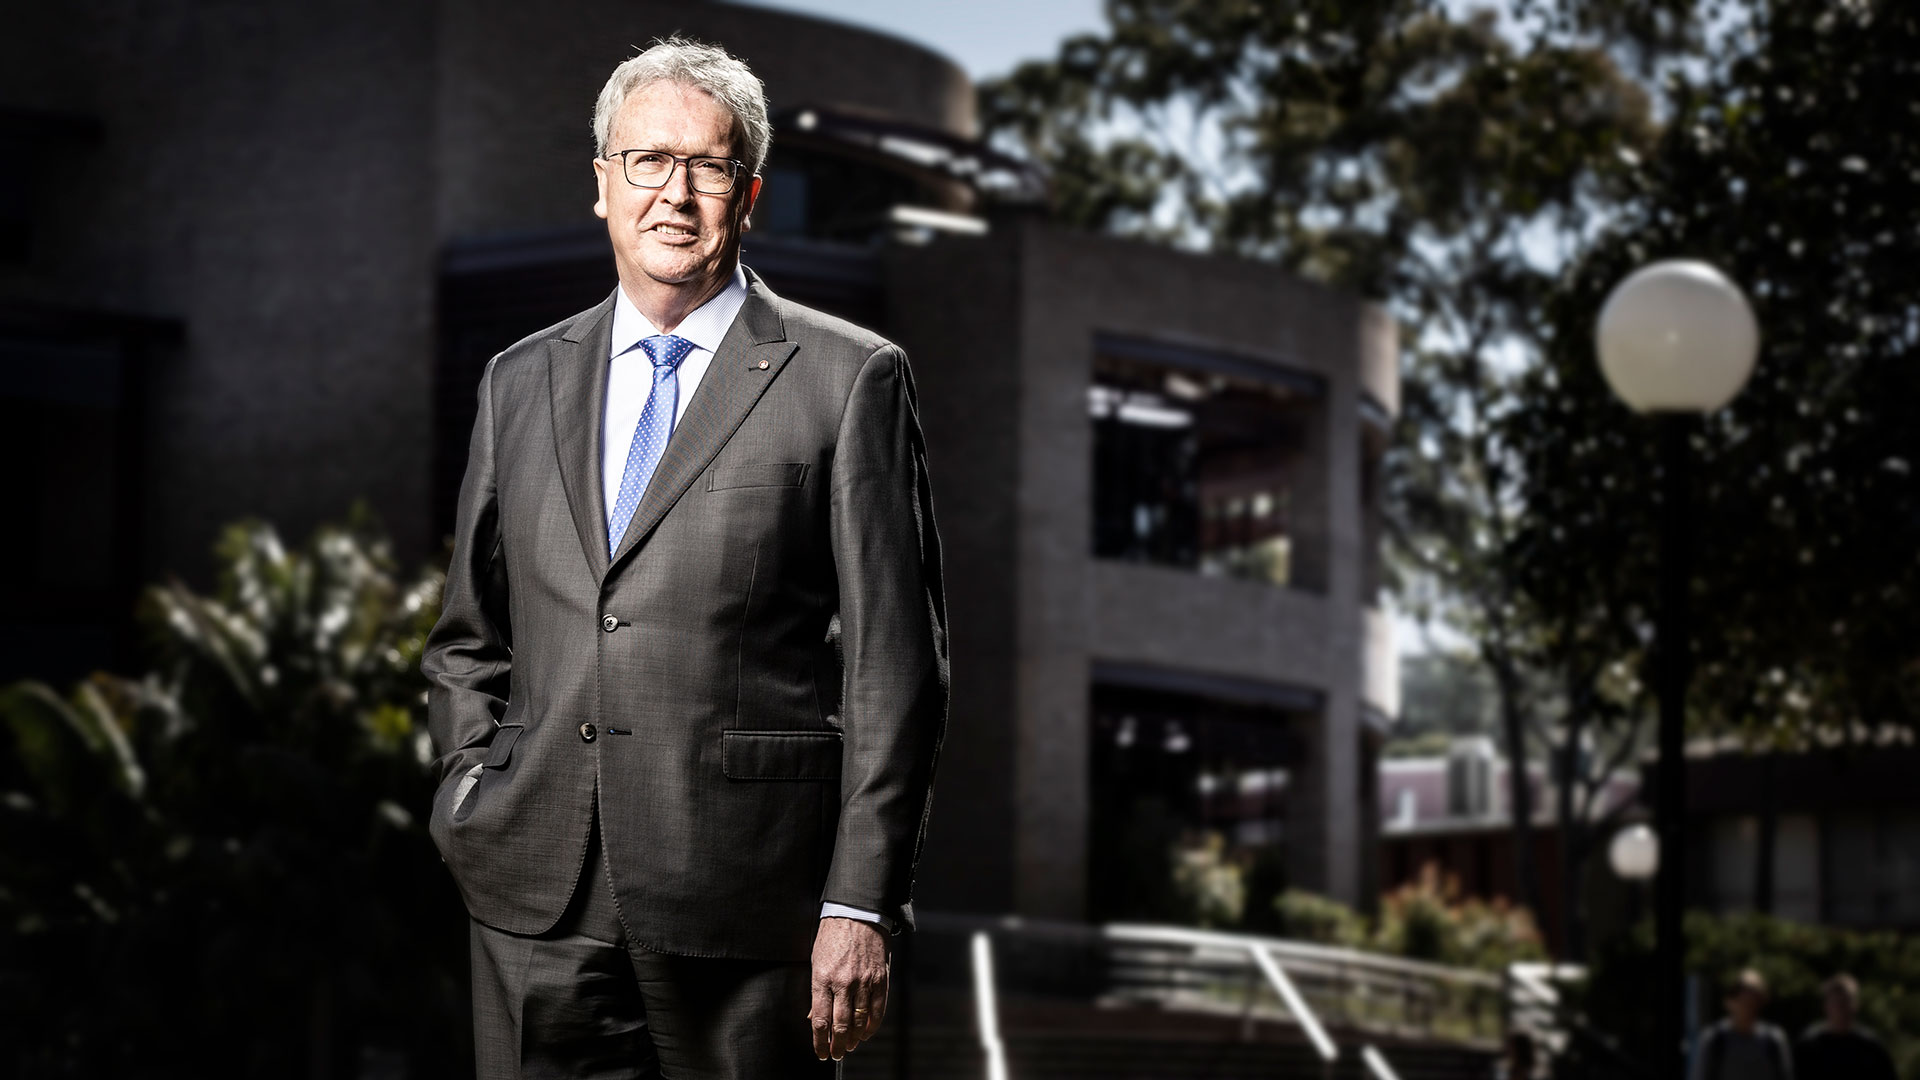 UOW confronts COVID-19 financial impact